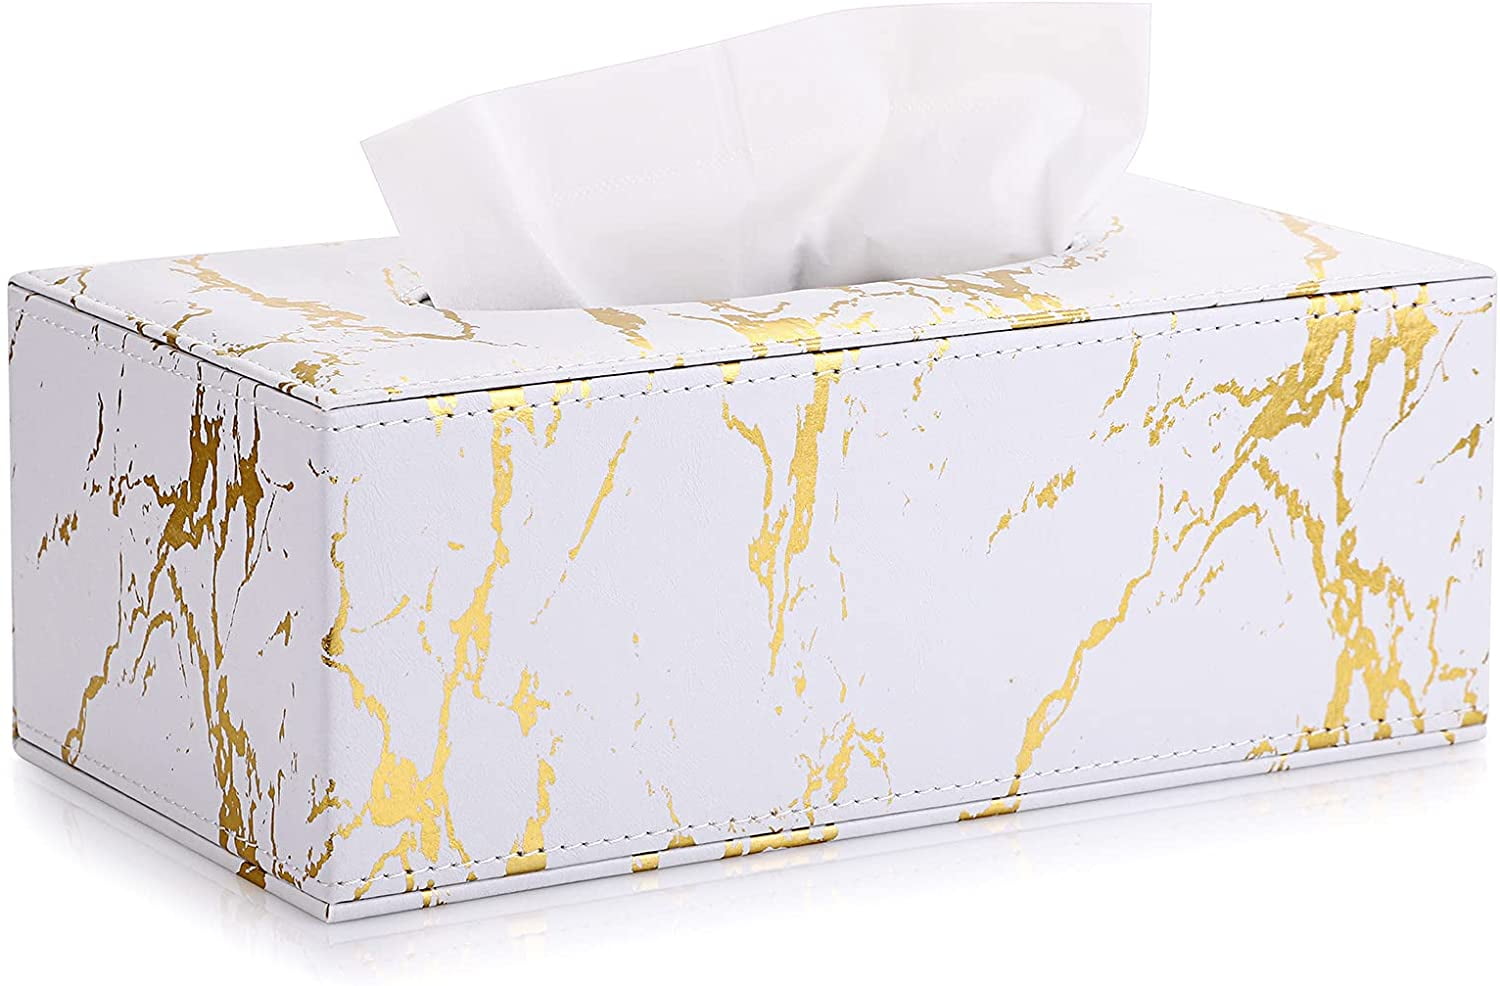 Details about   Black PU Leather Tissue Box Car Home Office Pumping Paper Napkin Holder W/Strap 